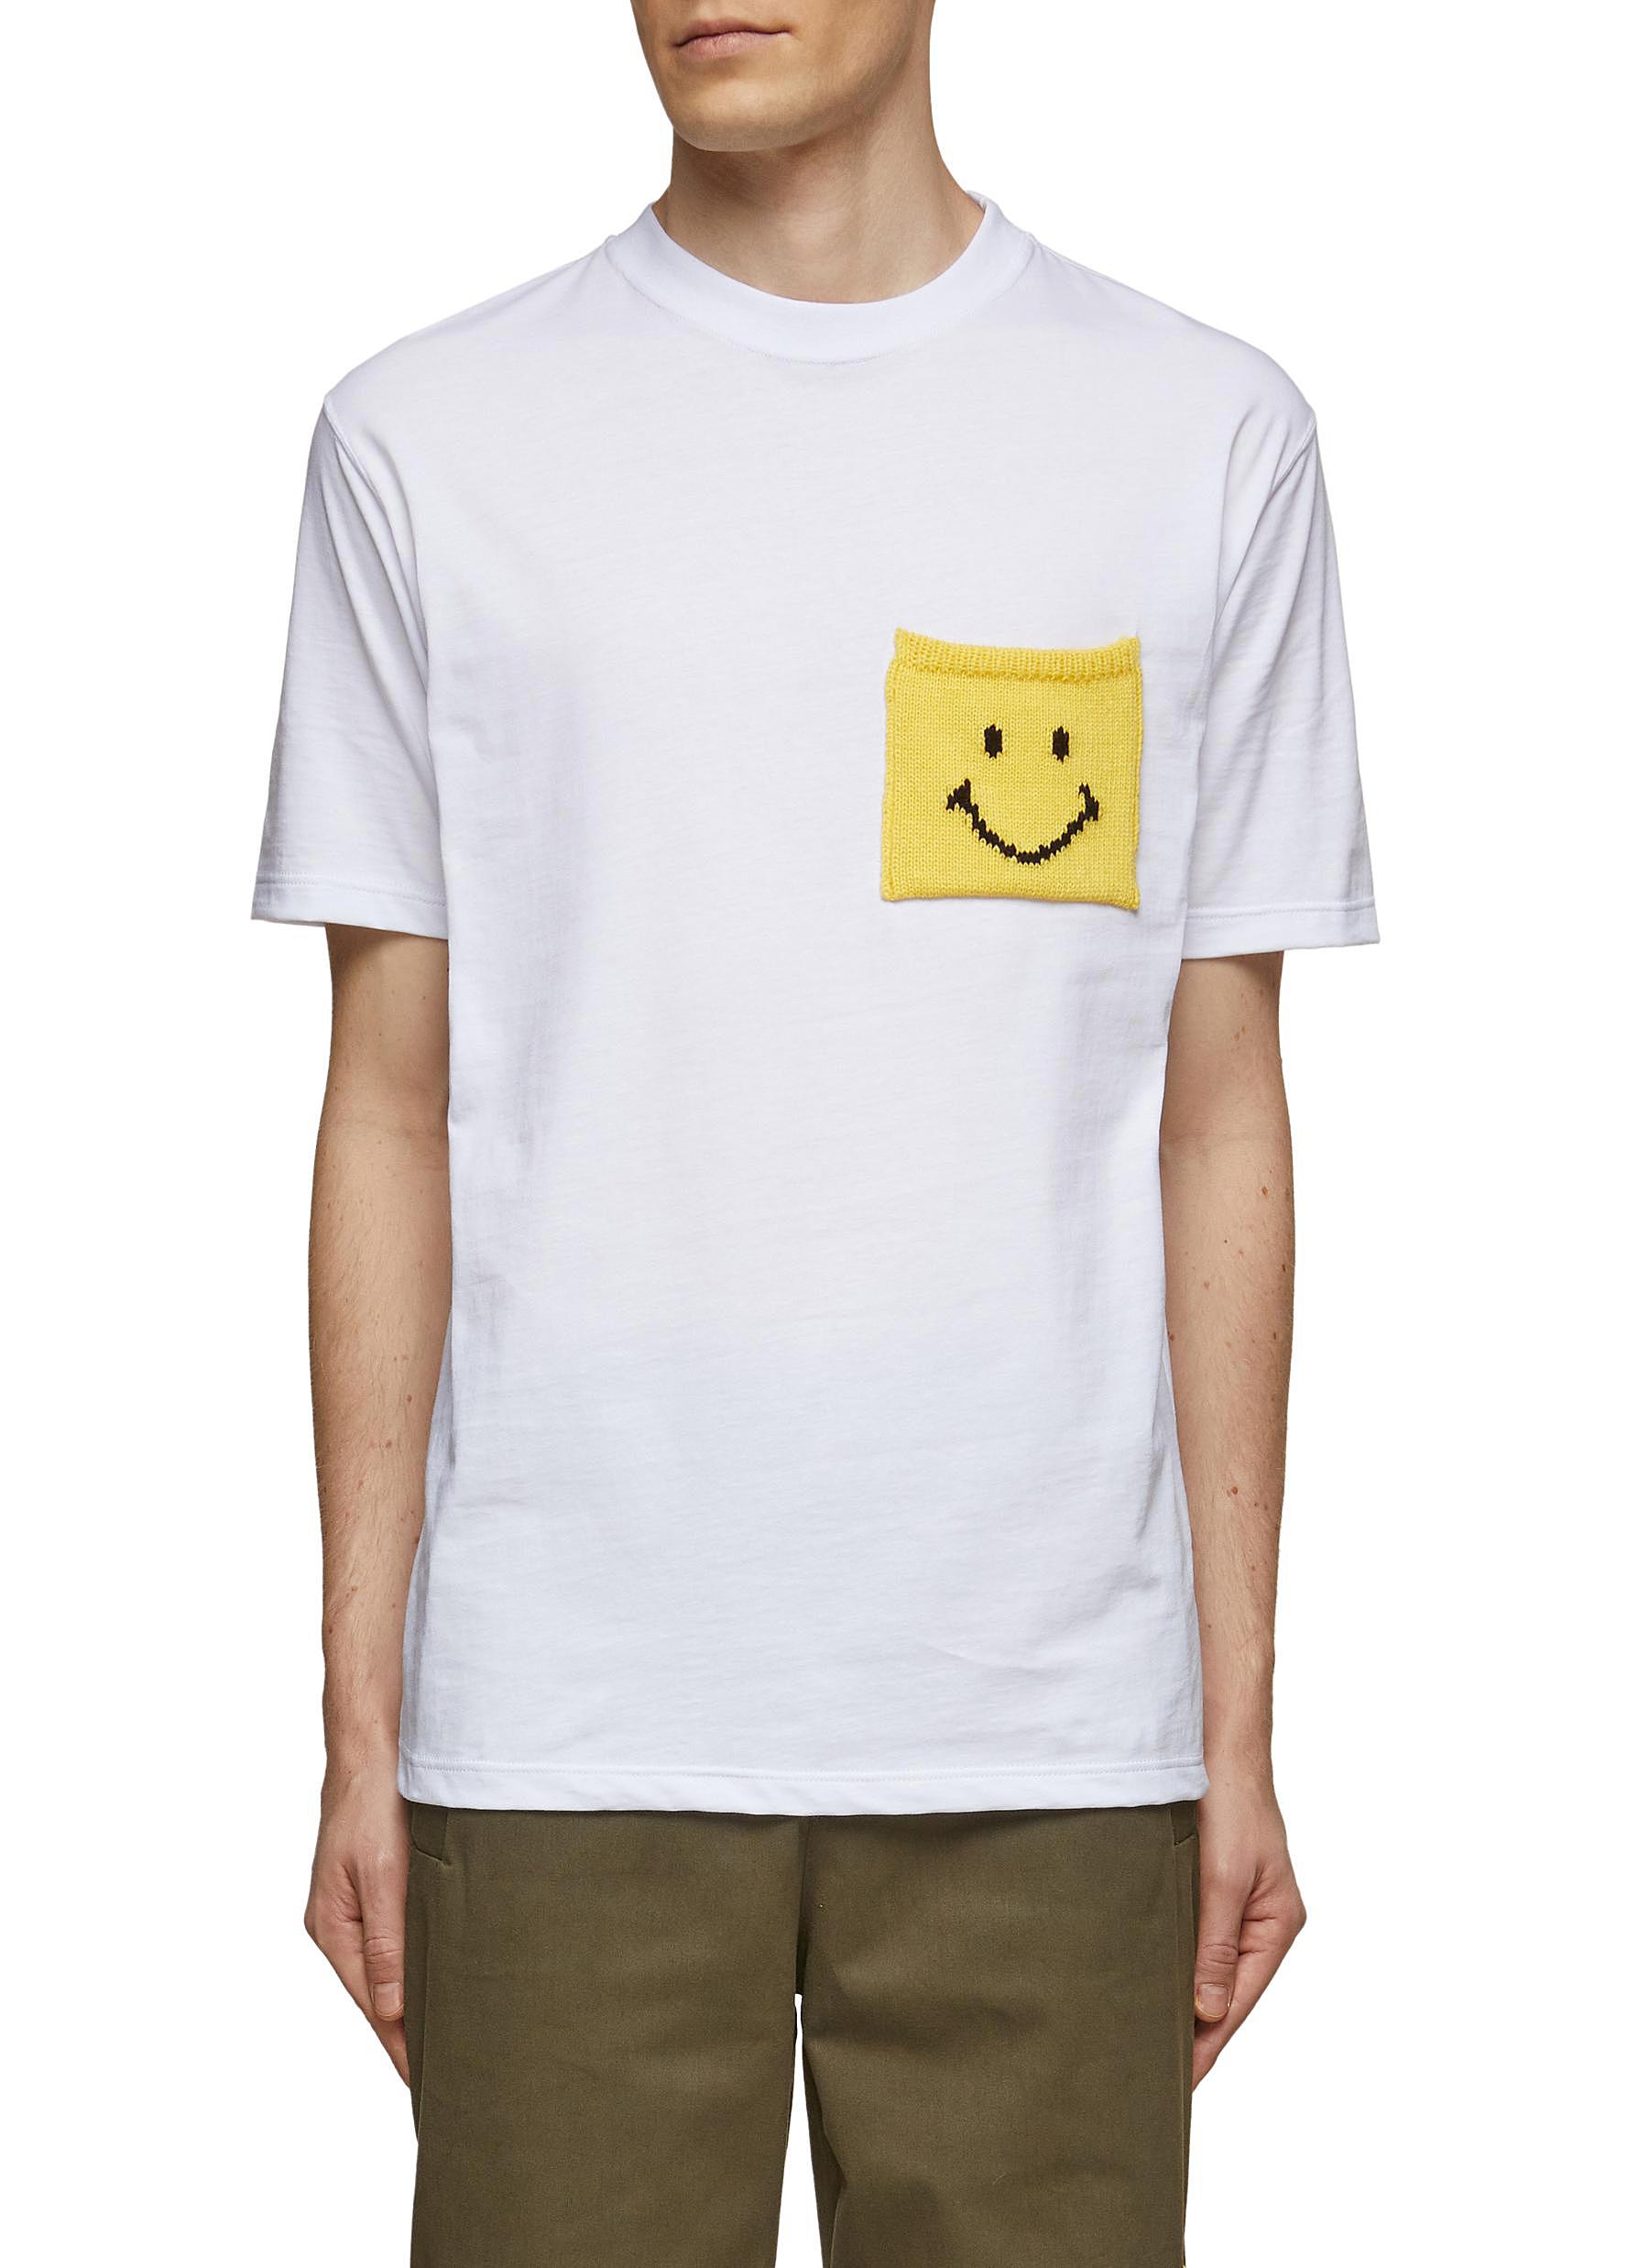 SMILEY FACE KNITTED PATCH CREWNECK SHORT SLEEVE T-SHIRT